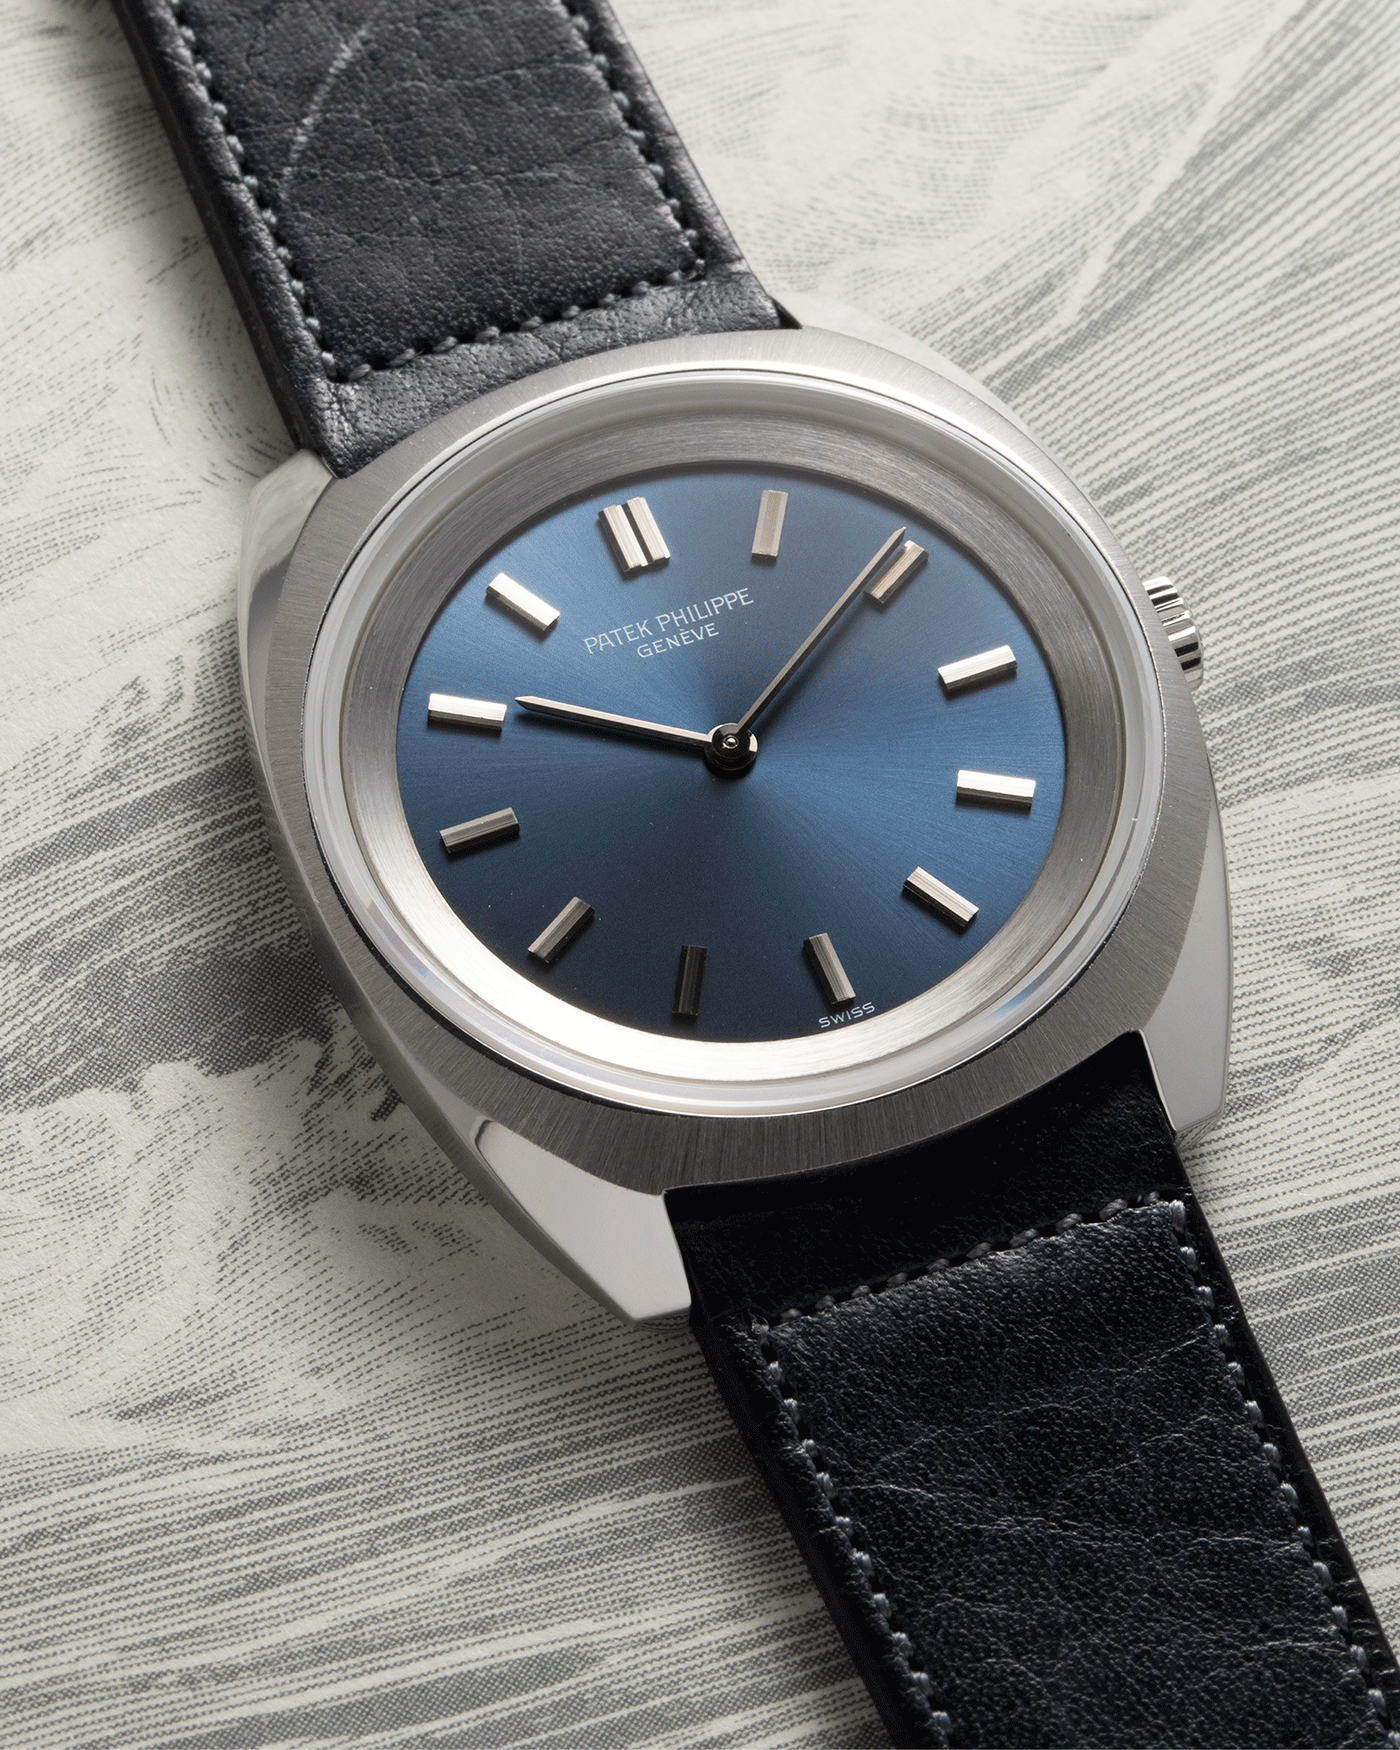 √ Brand: Patek Philippe Year: 1970s Reference: 3579 Material: Stainless Steel Movement: Cal 23-300 Case Diameter: 33mm Strap: Accurate Form Navy Blue Japanese Calf